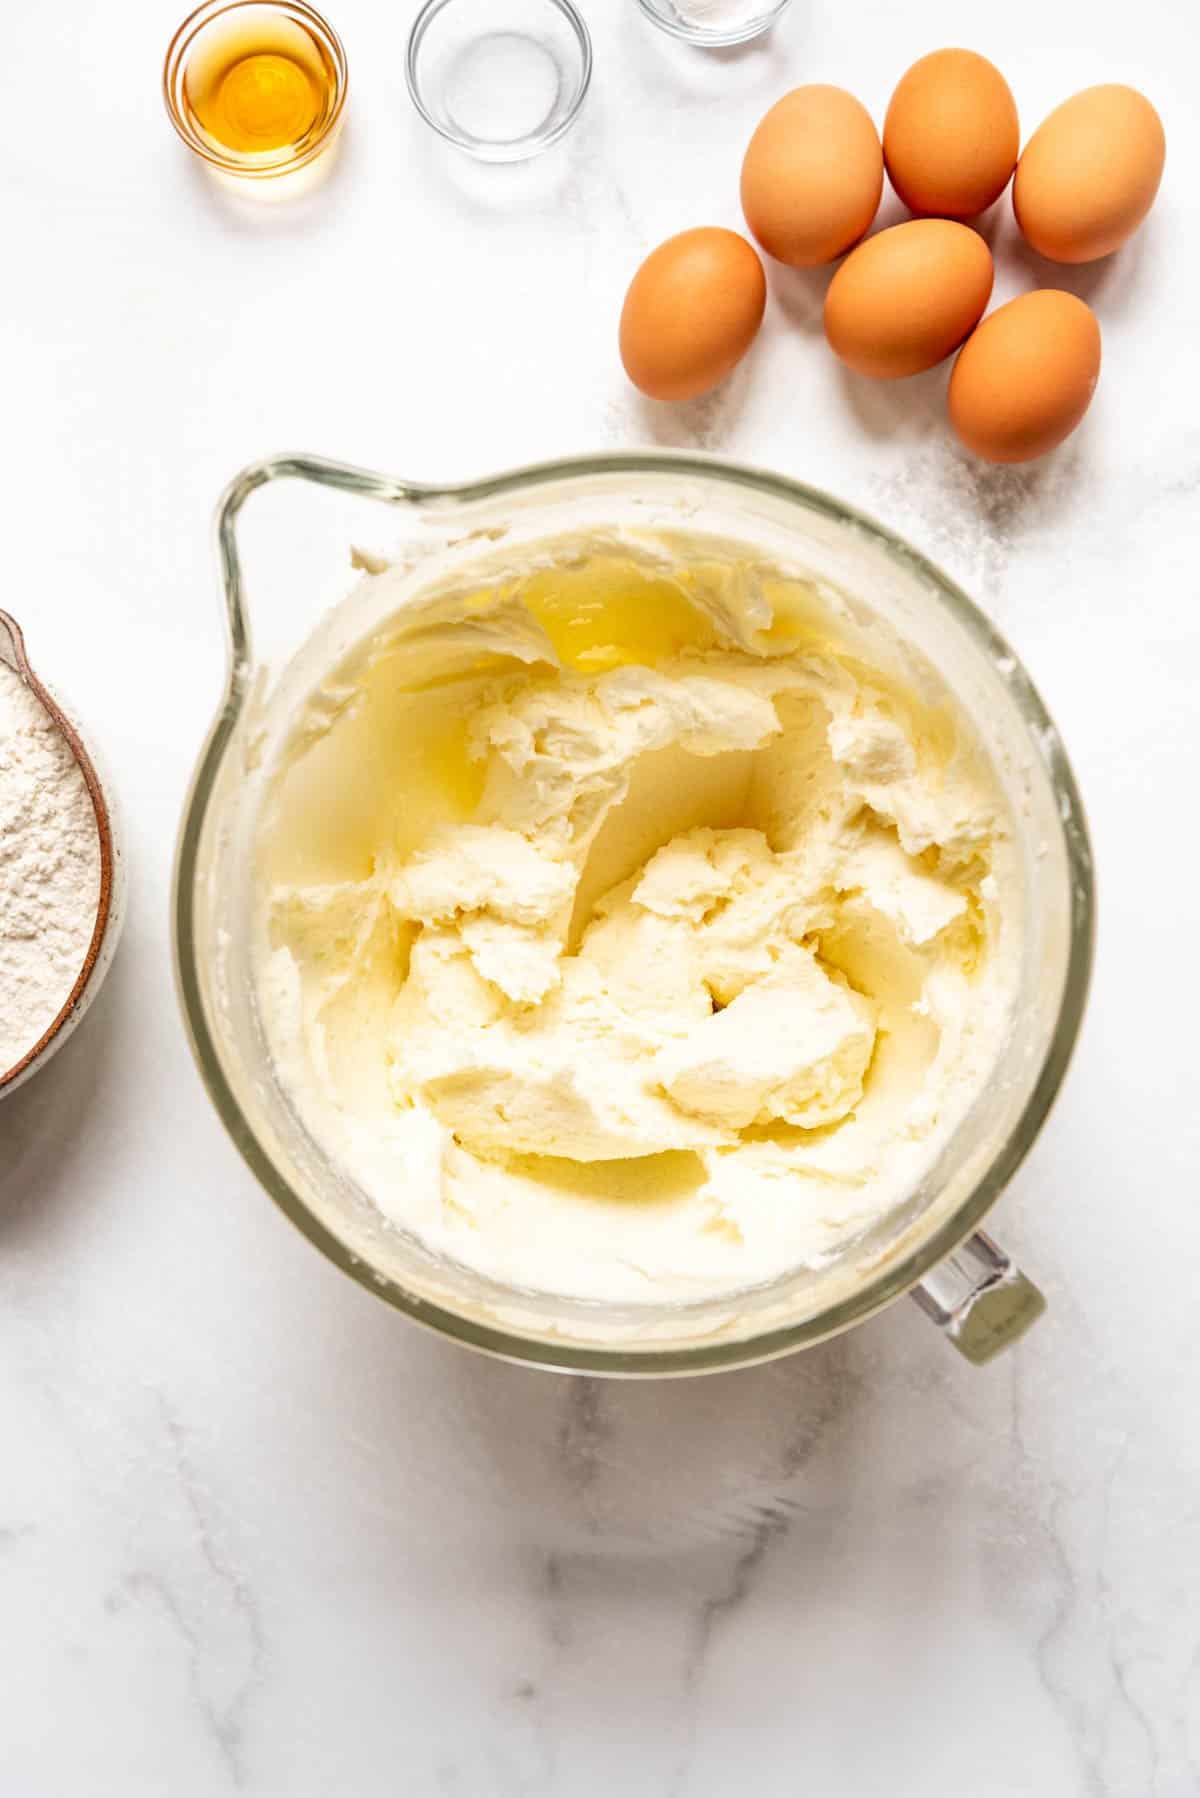 Creamed butter, cream cheese, and sugar in a bowl next to eggs, vanilla, and salt.